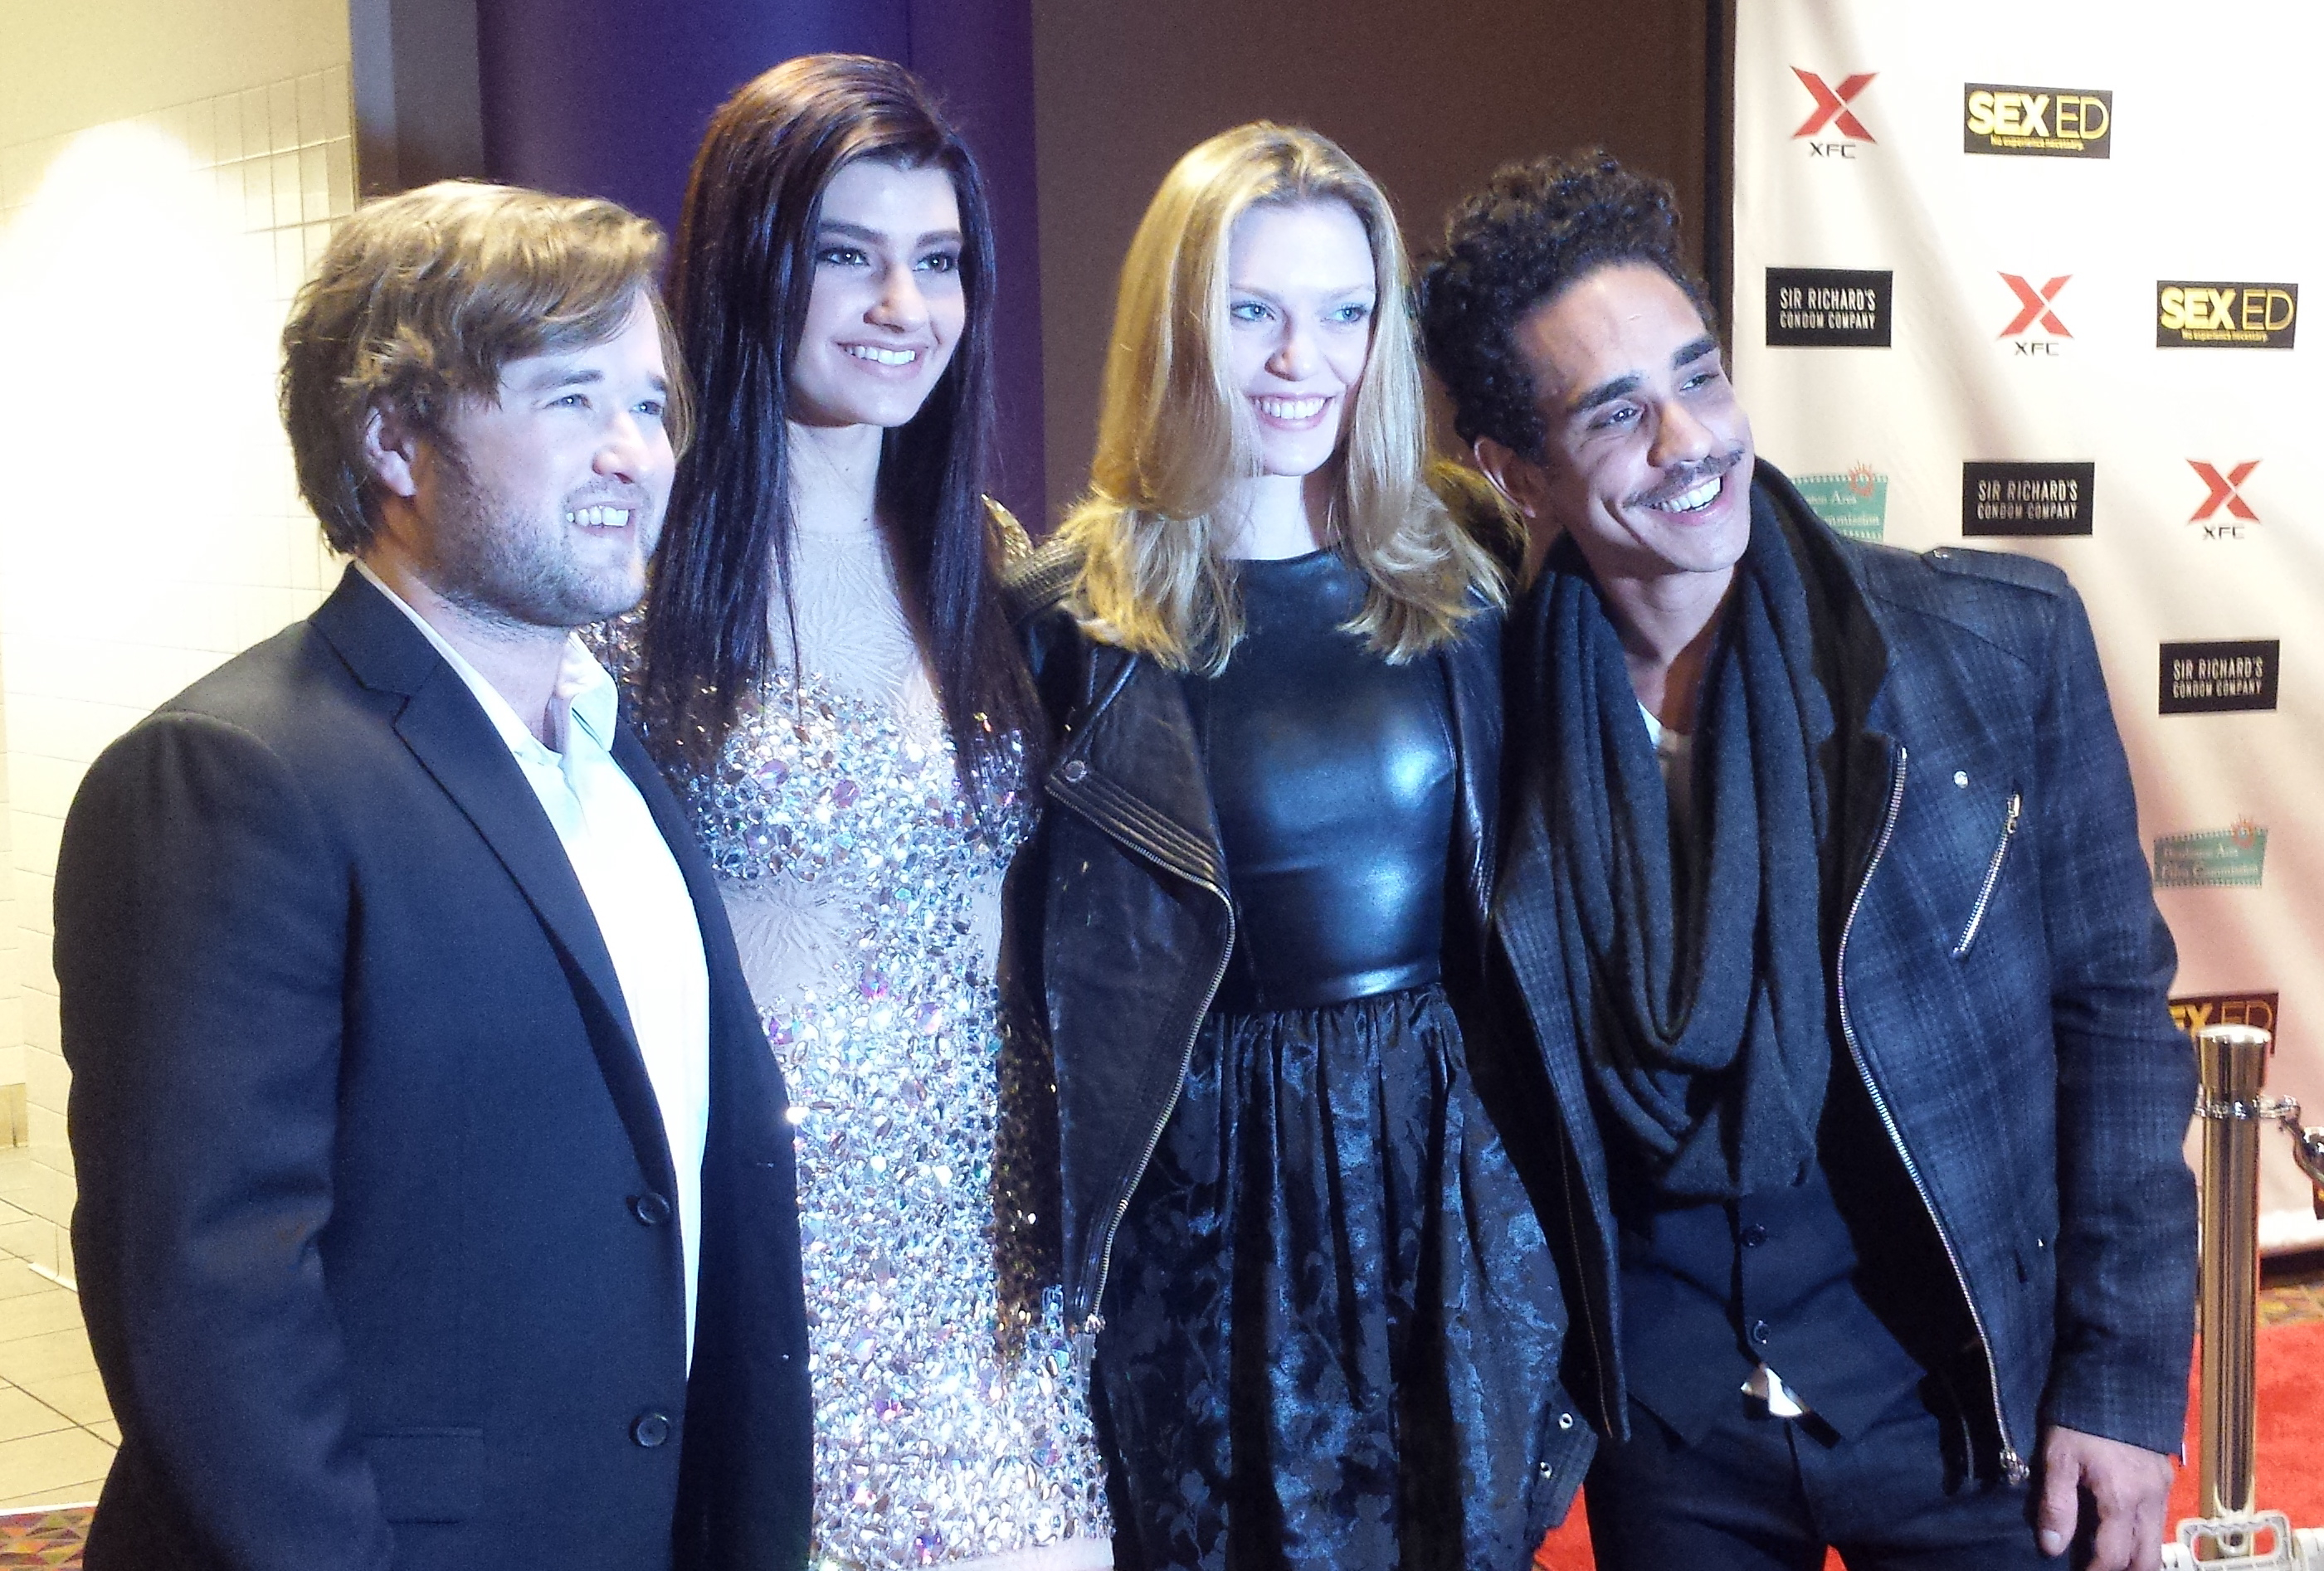 Sex Ed NYC premiere. Red Carpet with Haley Joel Osment, Ally Rahn, and Ray Santiago.